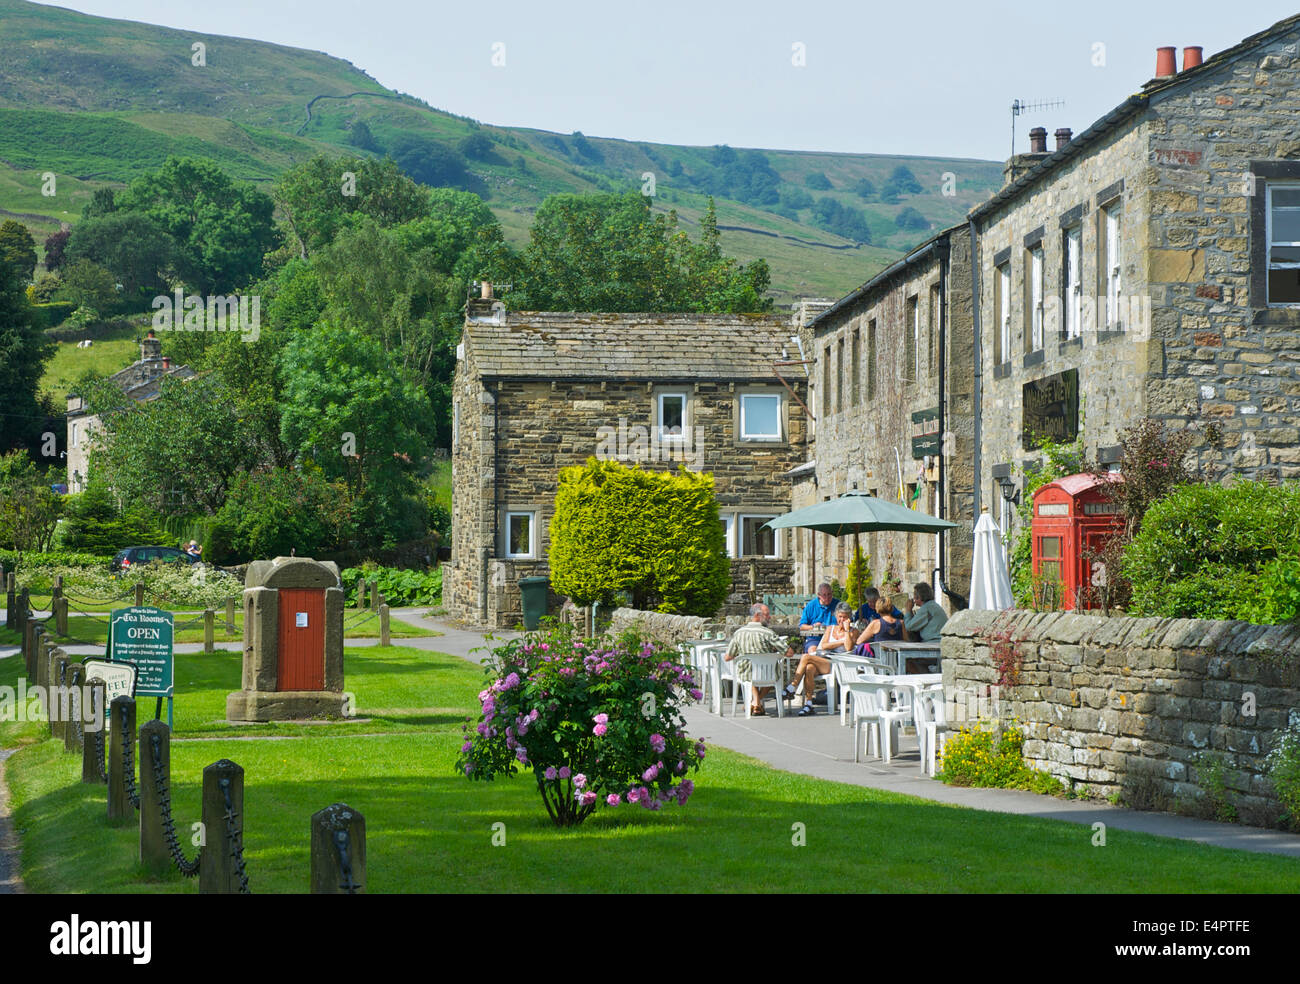 Cafe in dem Dorf Burnsall, Wharfedale, Yorkshire Dales National Park, North Yorkshire, England UK Stockfoto